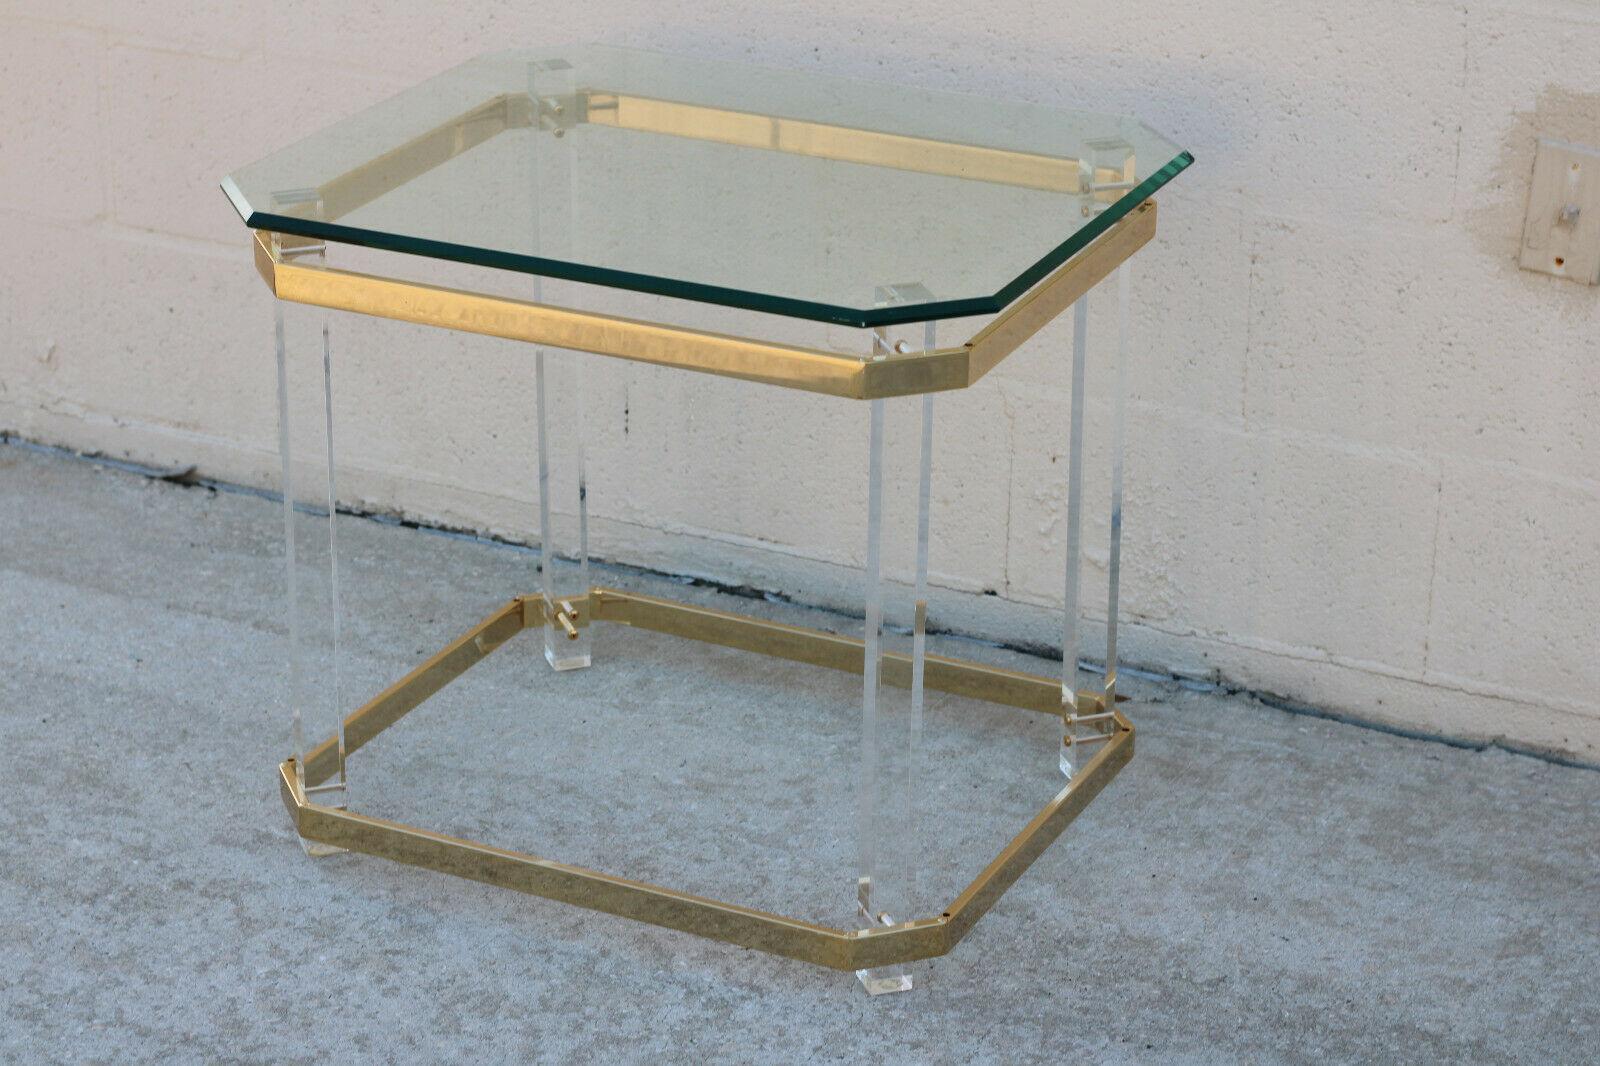 Vintage 1970s Lucite Brass and Glass Side Table after Charles Hollis Jones in Hollywood Regency or Mid-Century Modern Style

Lucite has a natural transparency, providing a beautifully clean look, and it doesn’t add any visual clutter. Side table is